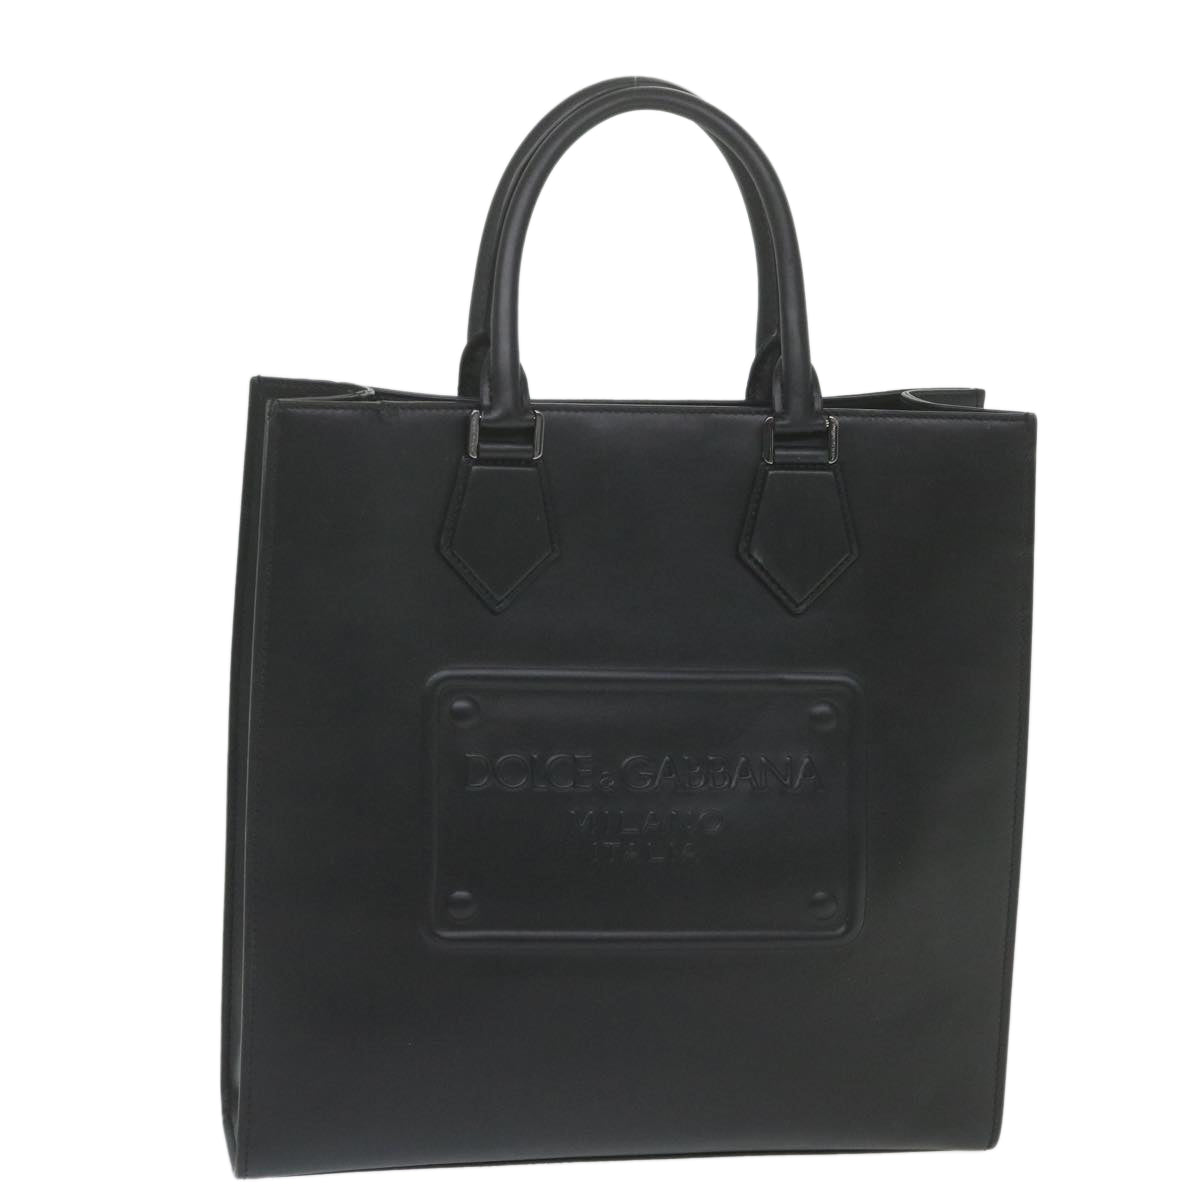 DOLCE&GABBANA Tote Bag Calf leather 2way Black Auth bs10232 - 0